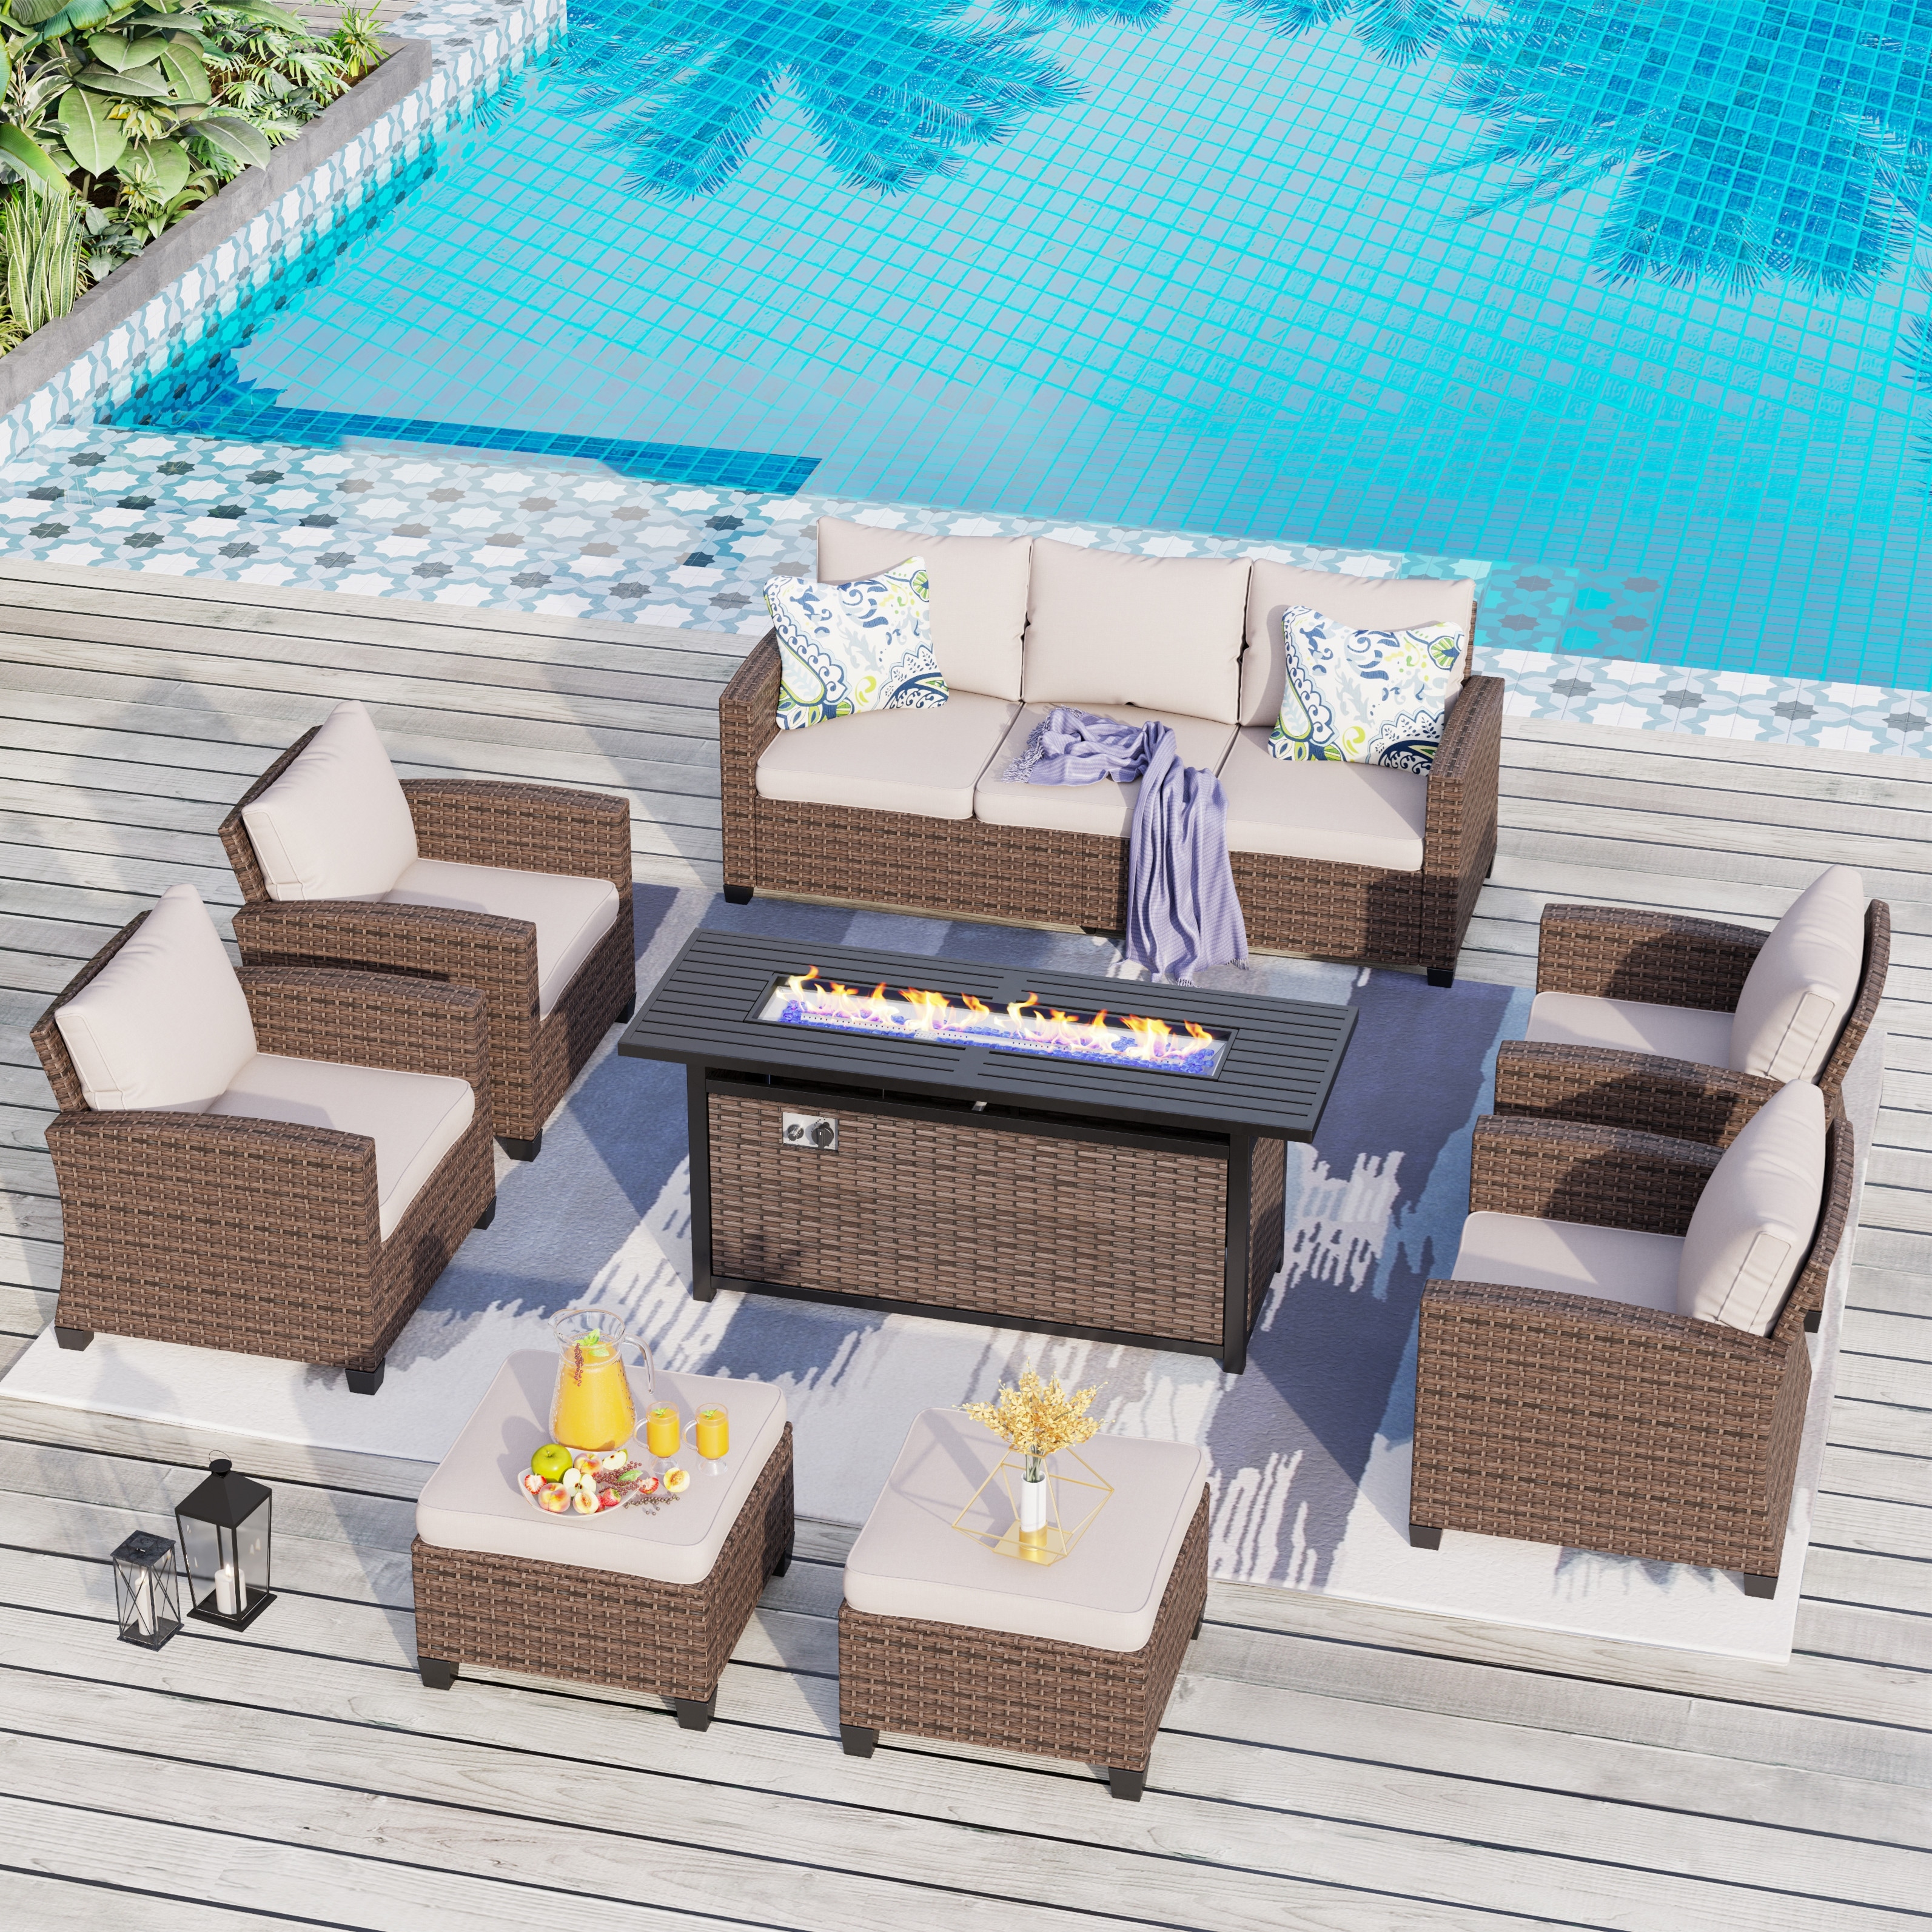 https://ak1.ostkcdn.com/images/products/is/images/direct/9ed65ceaea1e80ac5693a30c761ac7e43de0a69a/7-9-Seat-Patio-Furniture-Wicker-Rattan-Outdoor-High-back-Sectional-Sofa-Conversation-Set-with-Firepit-Table.jpg